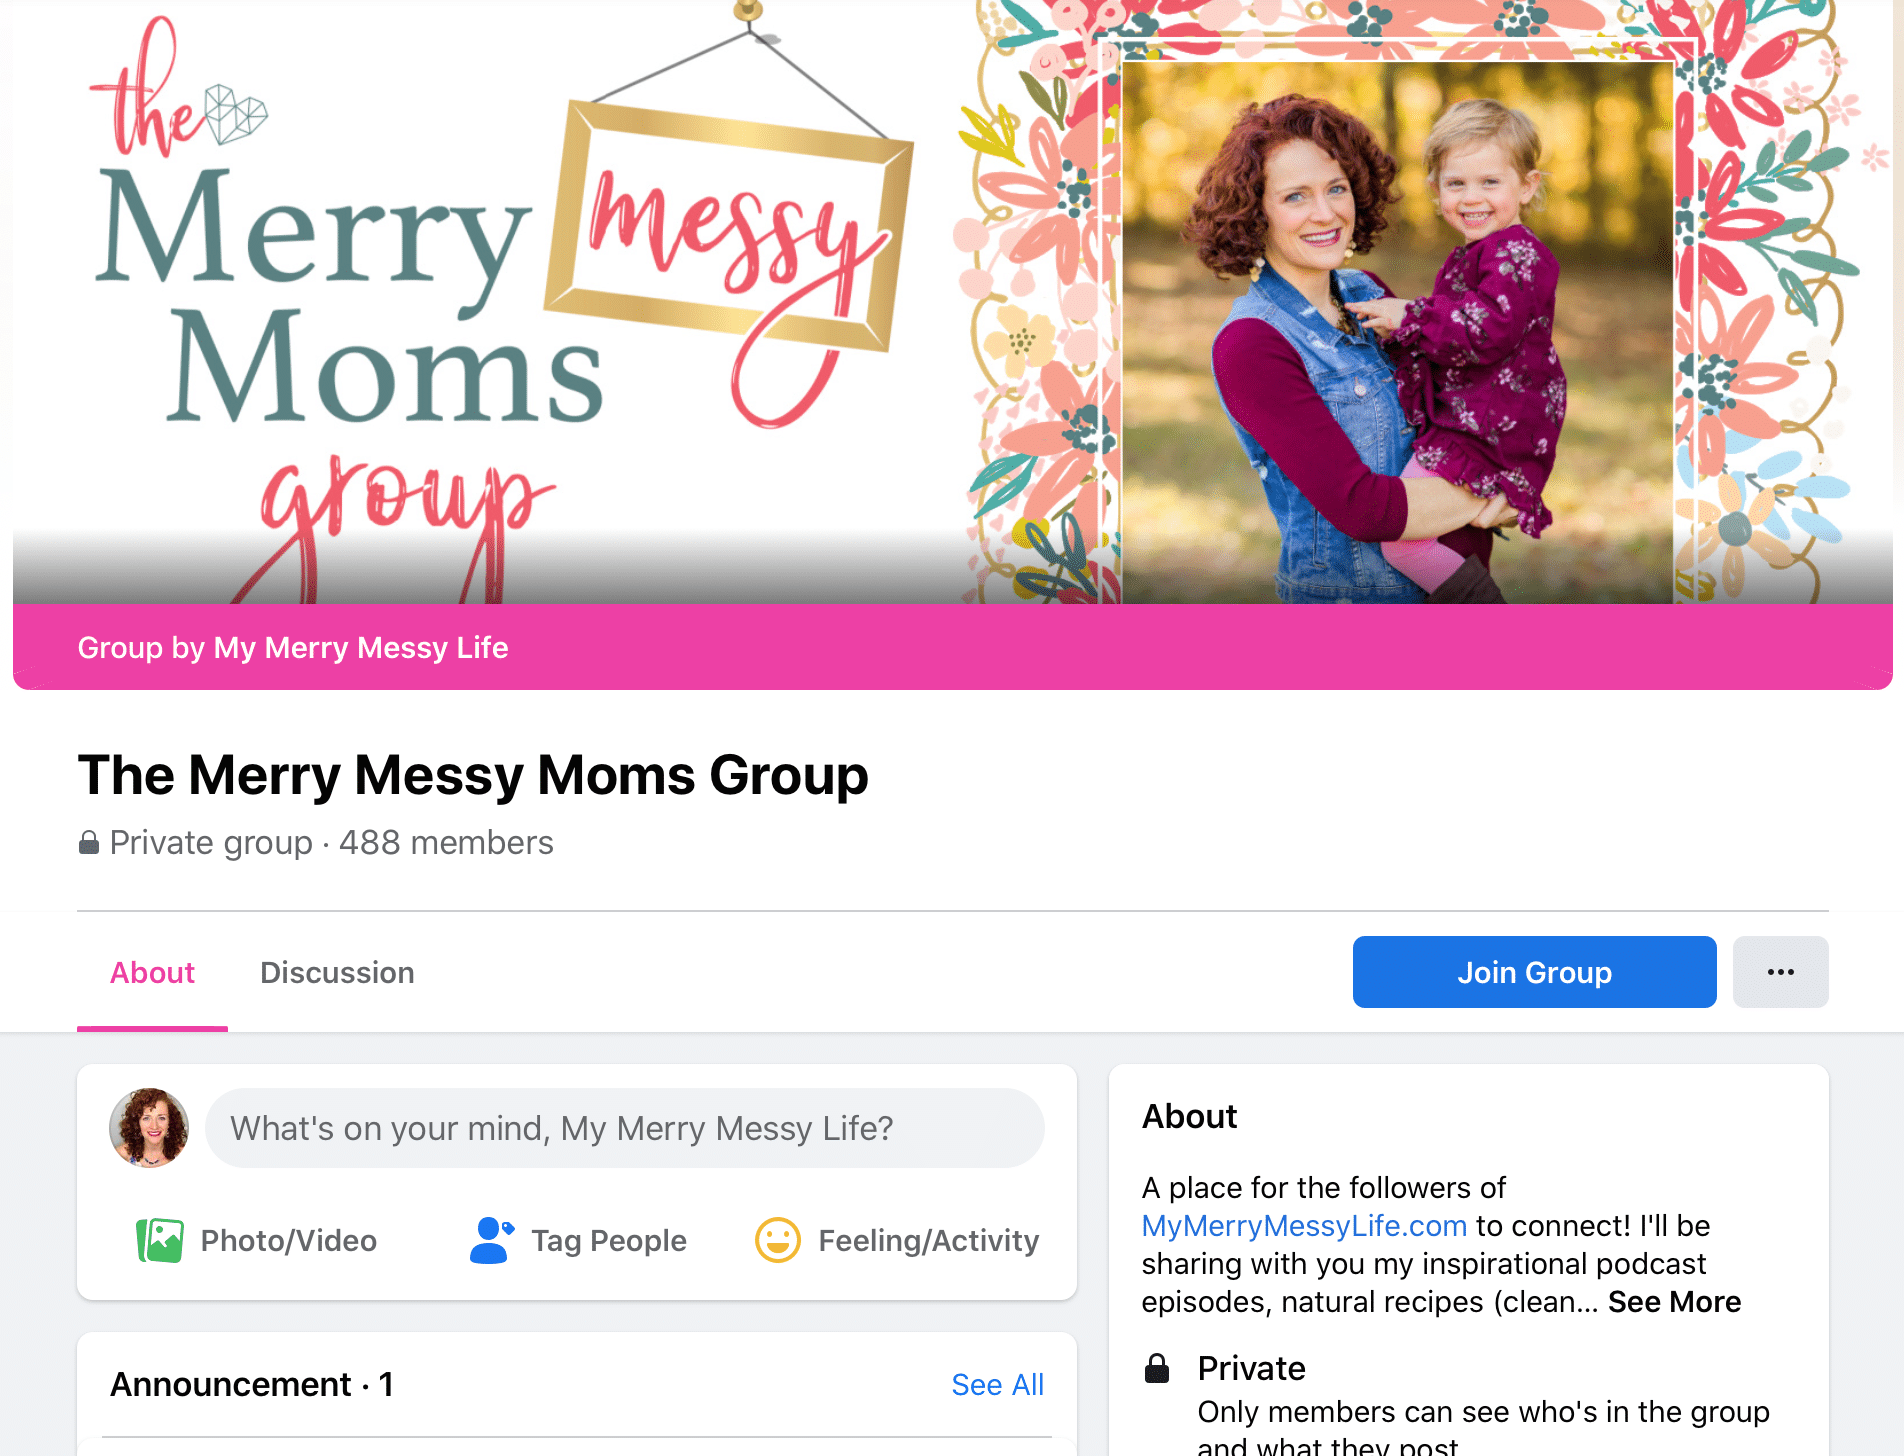 The Merry Messy Moms Group on Facebook